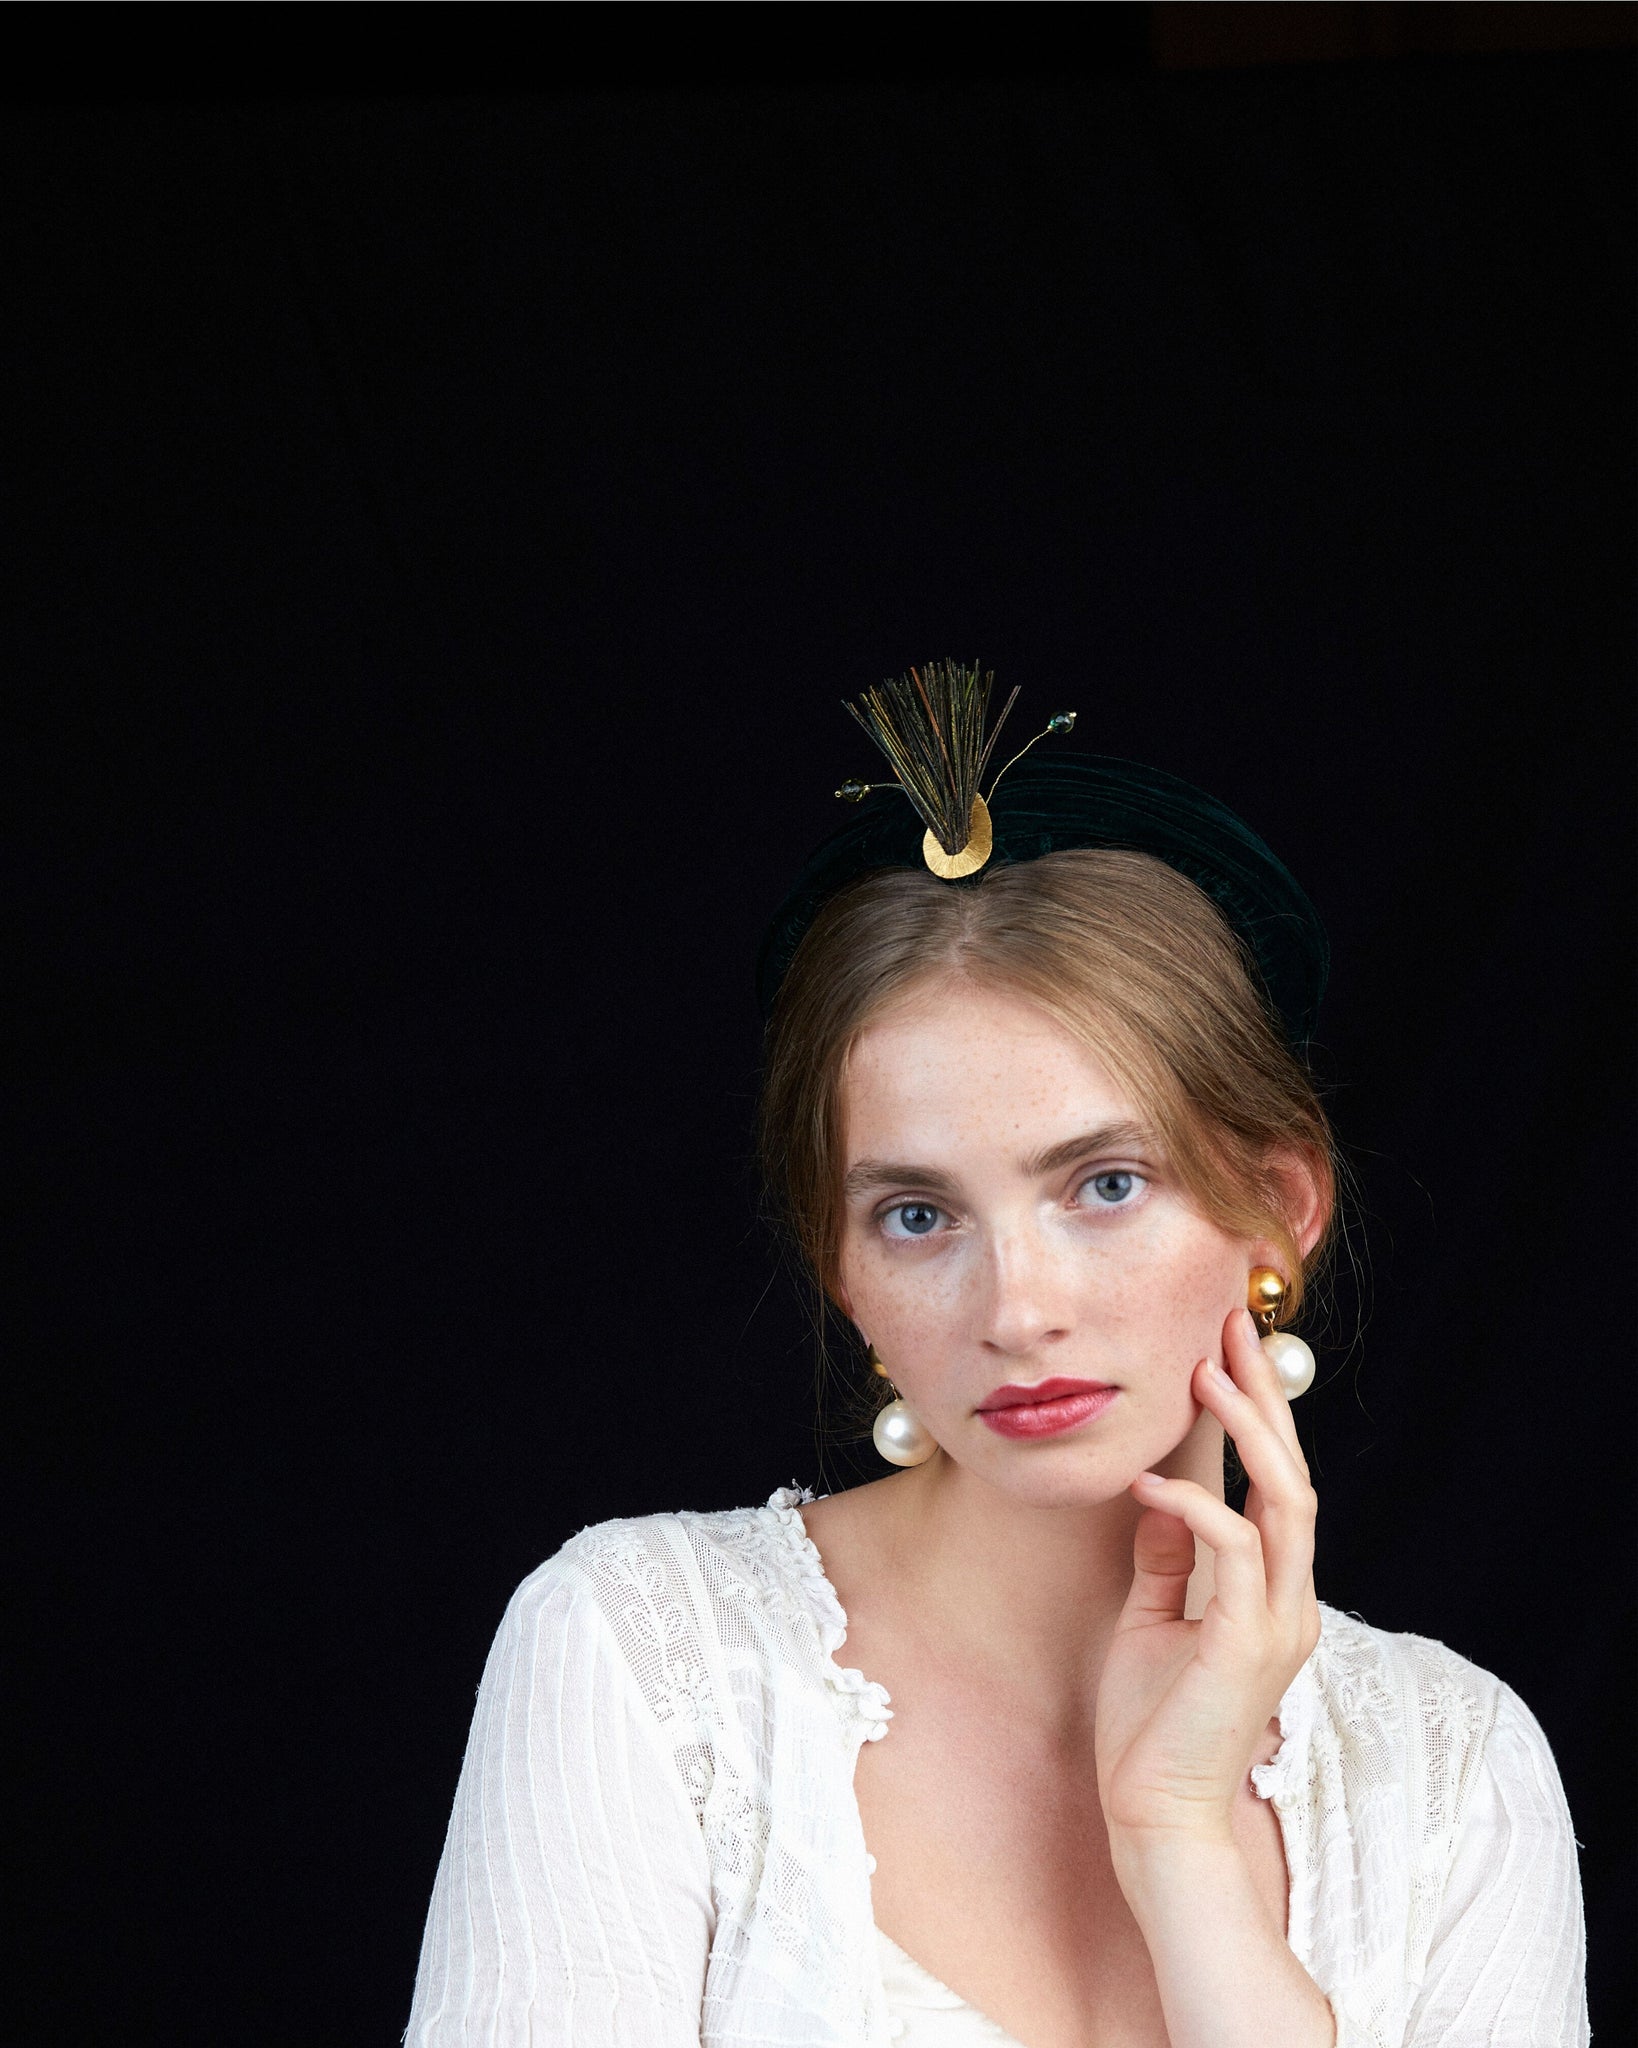 HEADQUARTER | couture headwear Cocktail hat in deep green color. Made of velvet, trimmed with peacock feathers, beads, and golden wire. Designed and handcrafted in Switzerland.